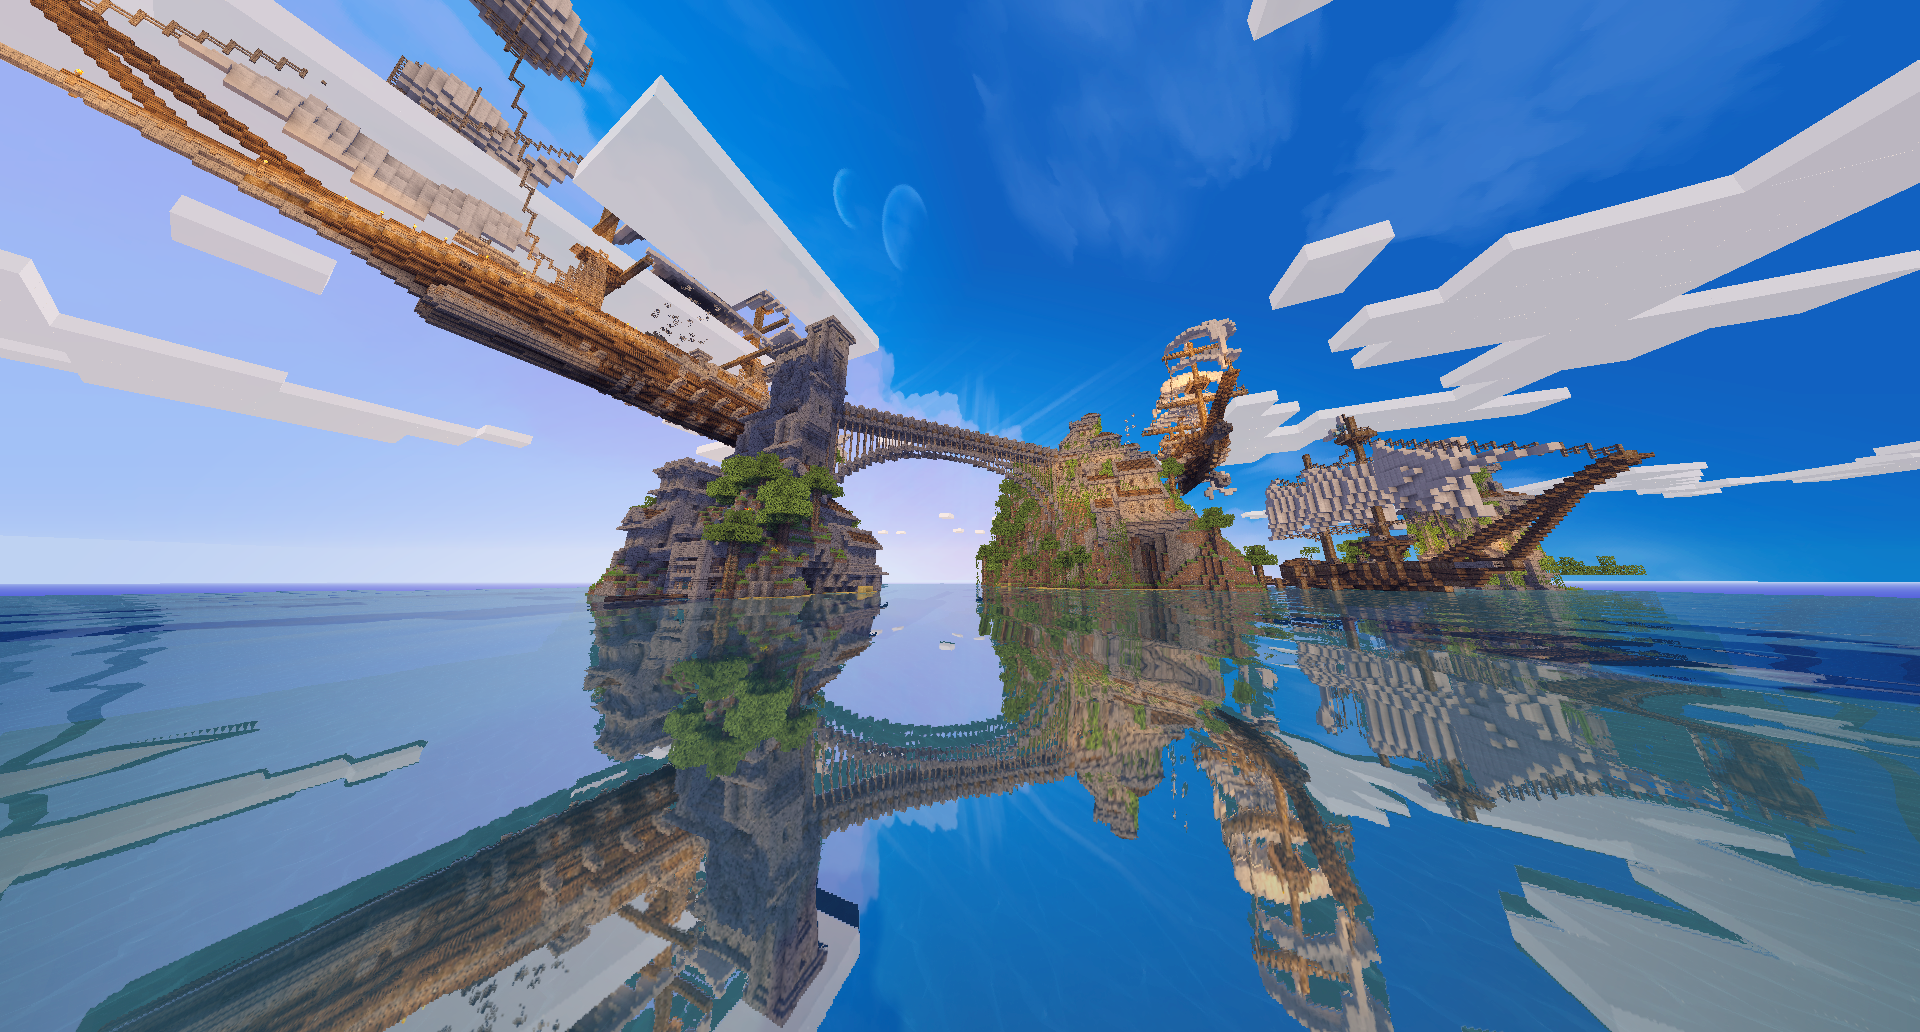 minecraft shaders texture pack 1.12